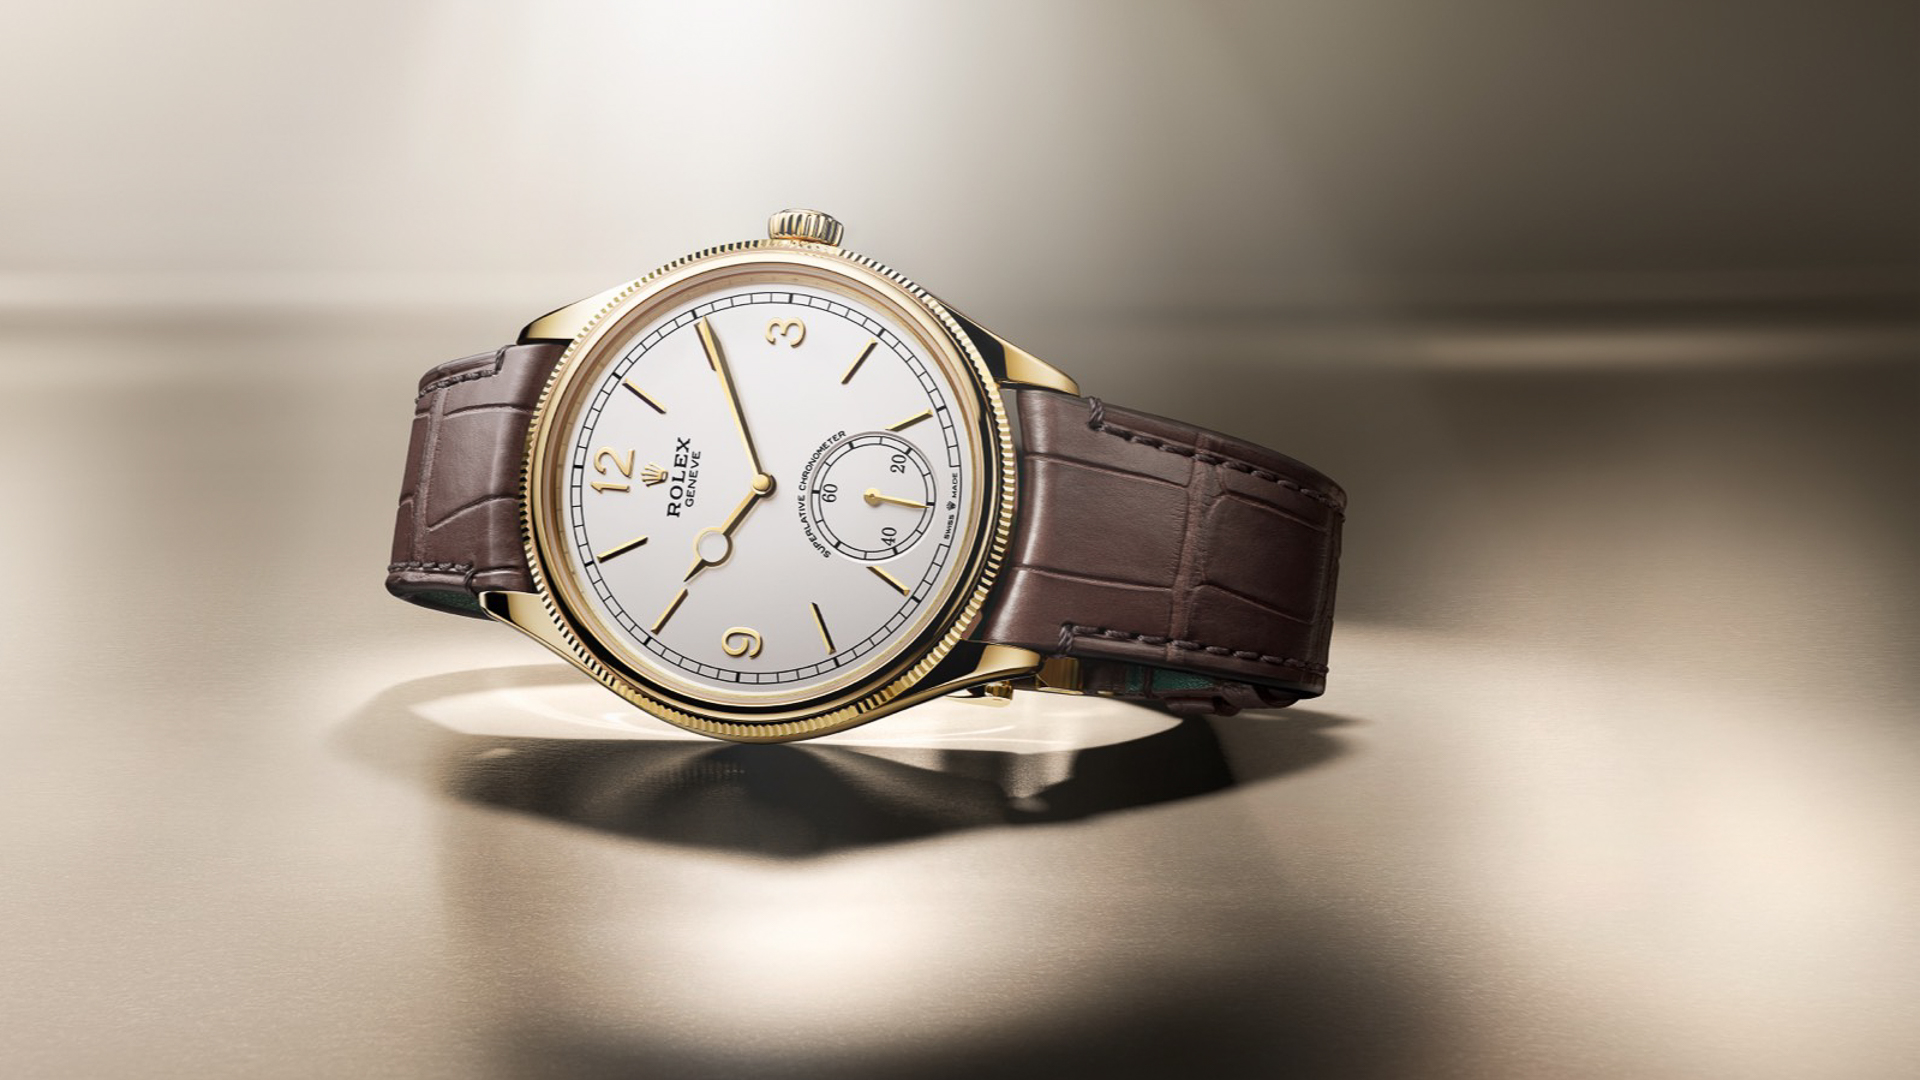 neo-vintage watches: the trend you need to know about, according to a rolex expert